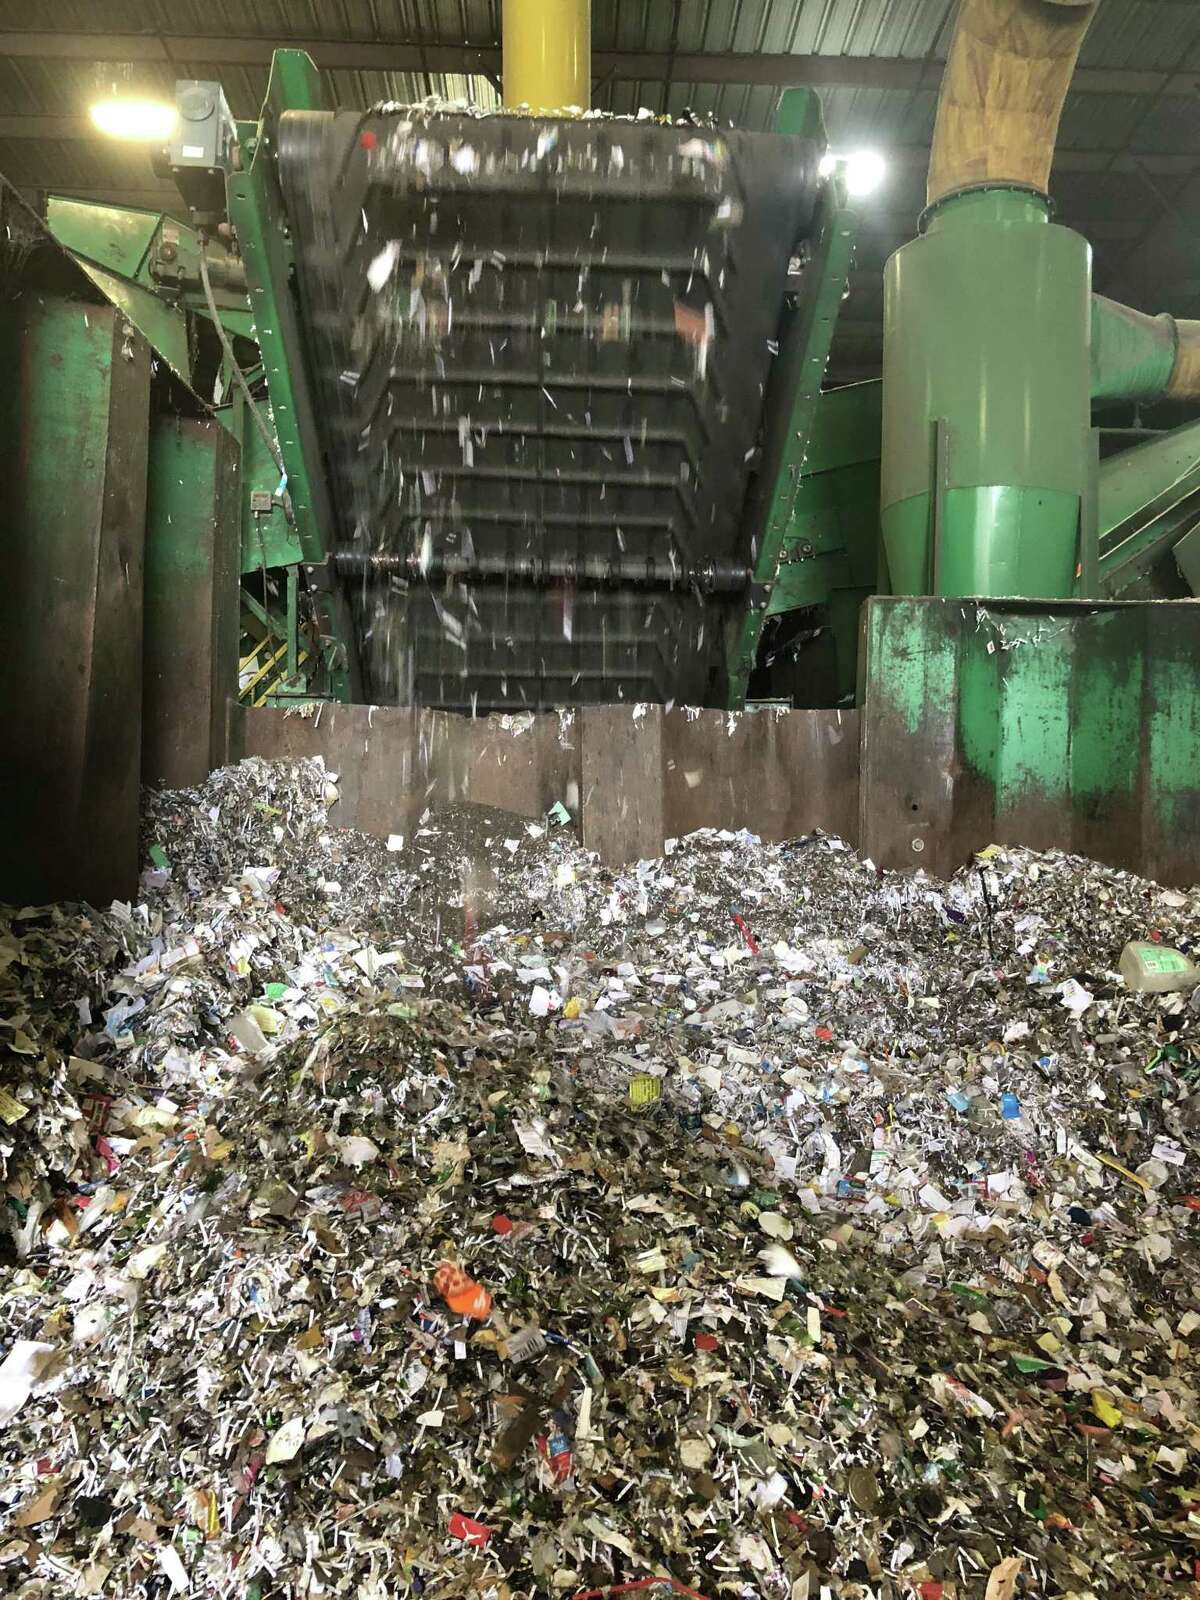 Recycled glass is processed at a local recycling facility. Small items gets mixed with the glass, contaminating it and reducing its market value.